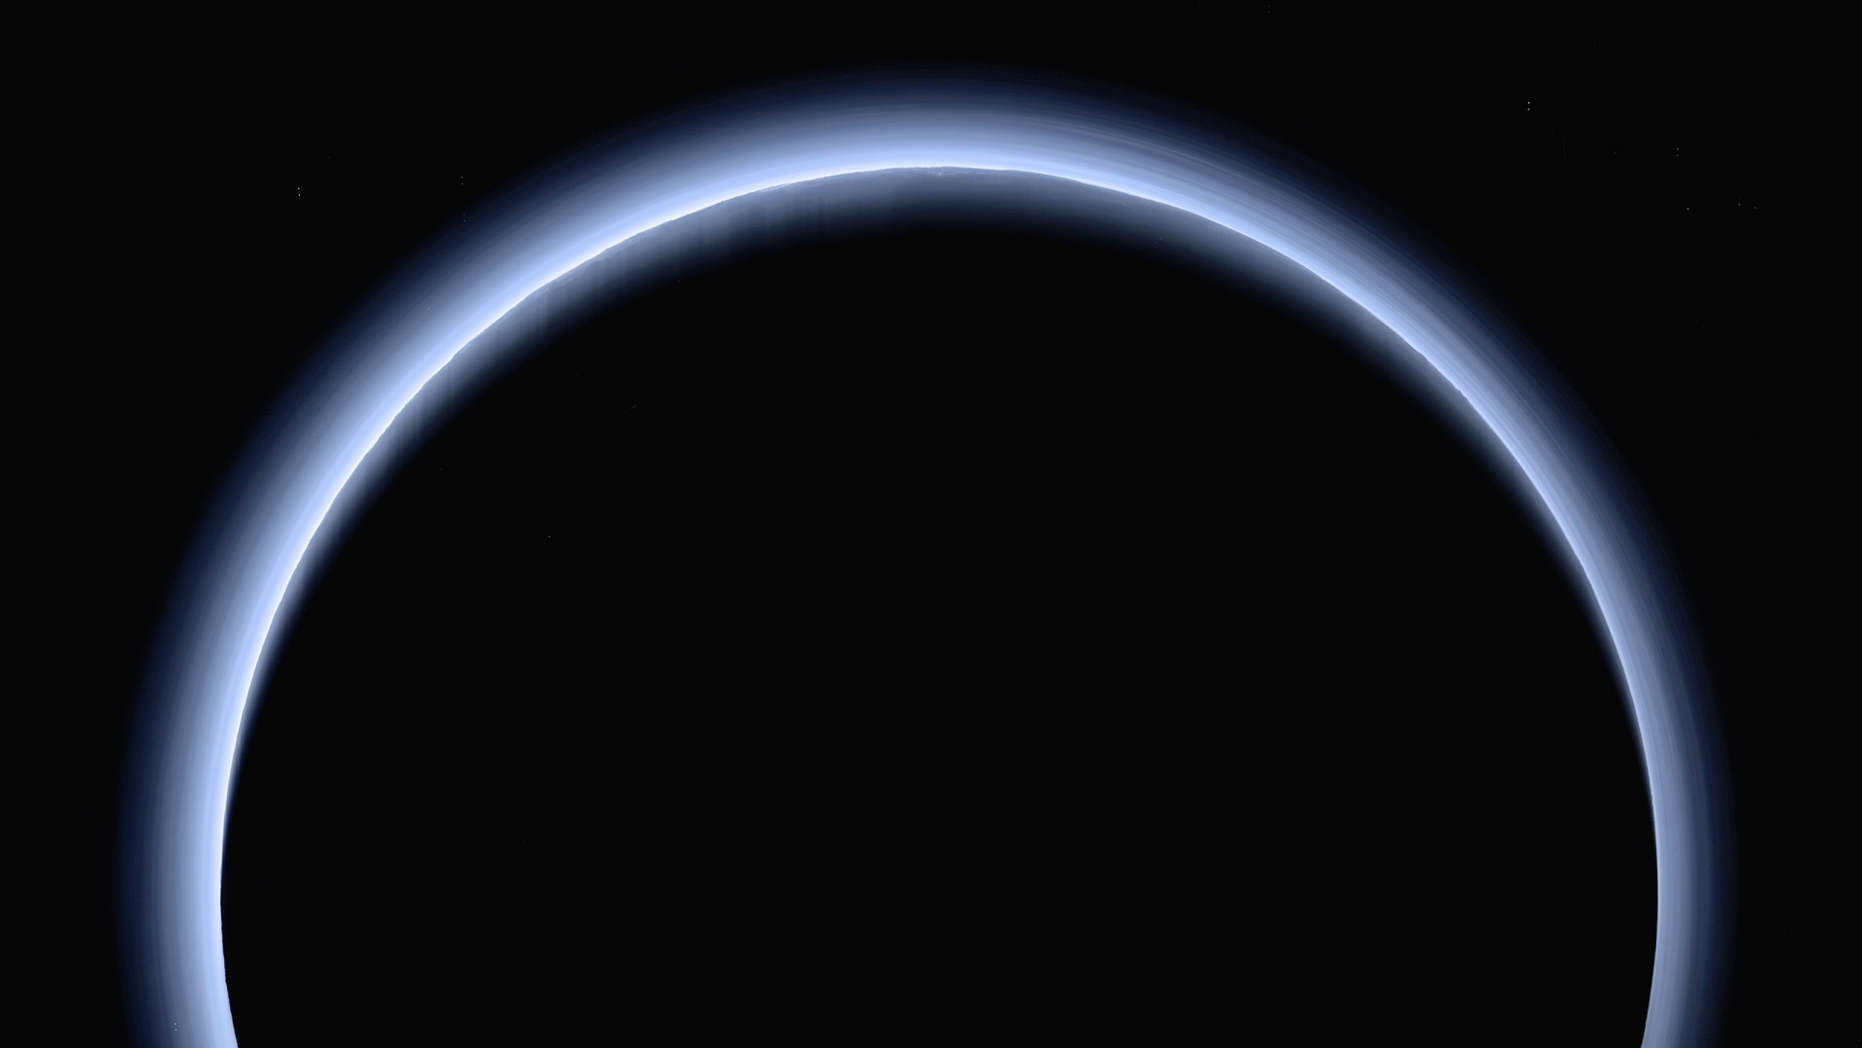 FILE - This image made available by NASA in March 2017 shows Pluto lit by the sun as the New Horizons spacecraft moves away from it at a distance of about 200,000 kilometers. Research Institute via AP)